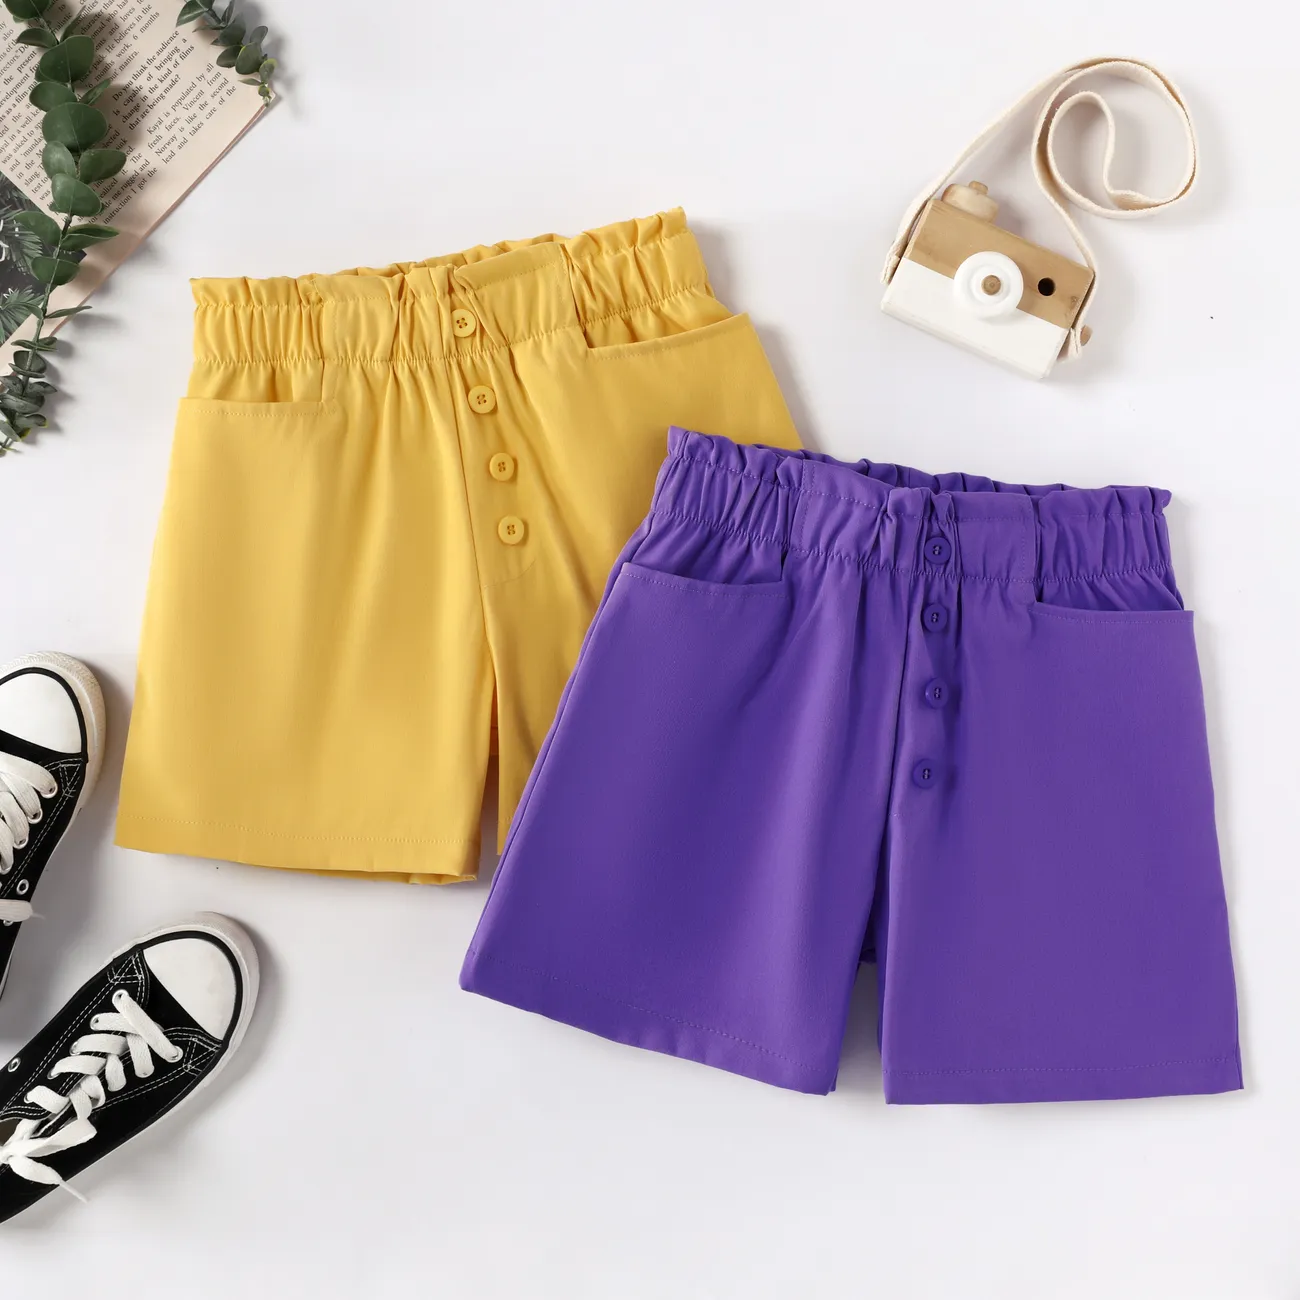 Cute High-Waisted Lace Shorts for Girls, Polyester Fabric, 1pc Set, Casual Style, Solid Color Yellow big image 1